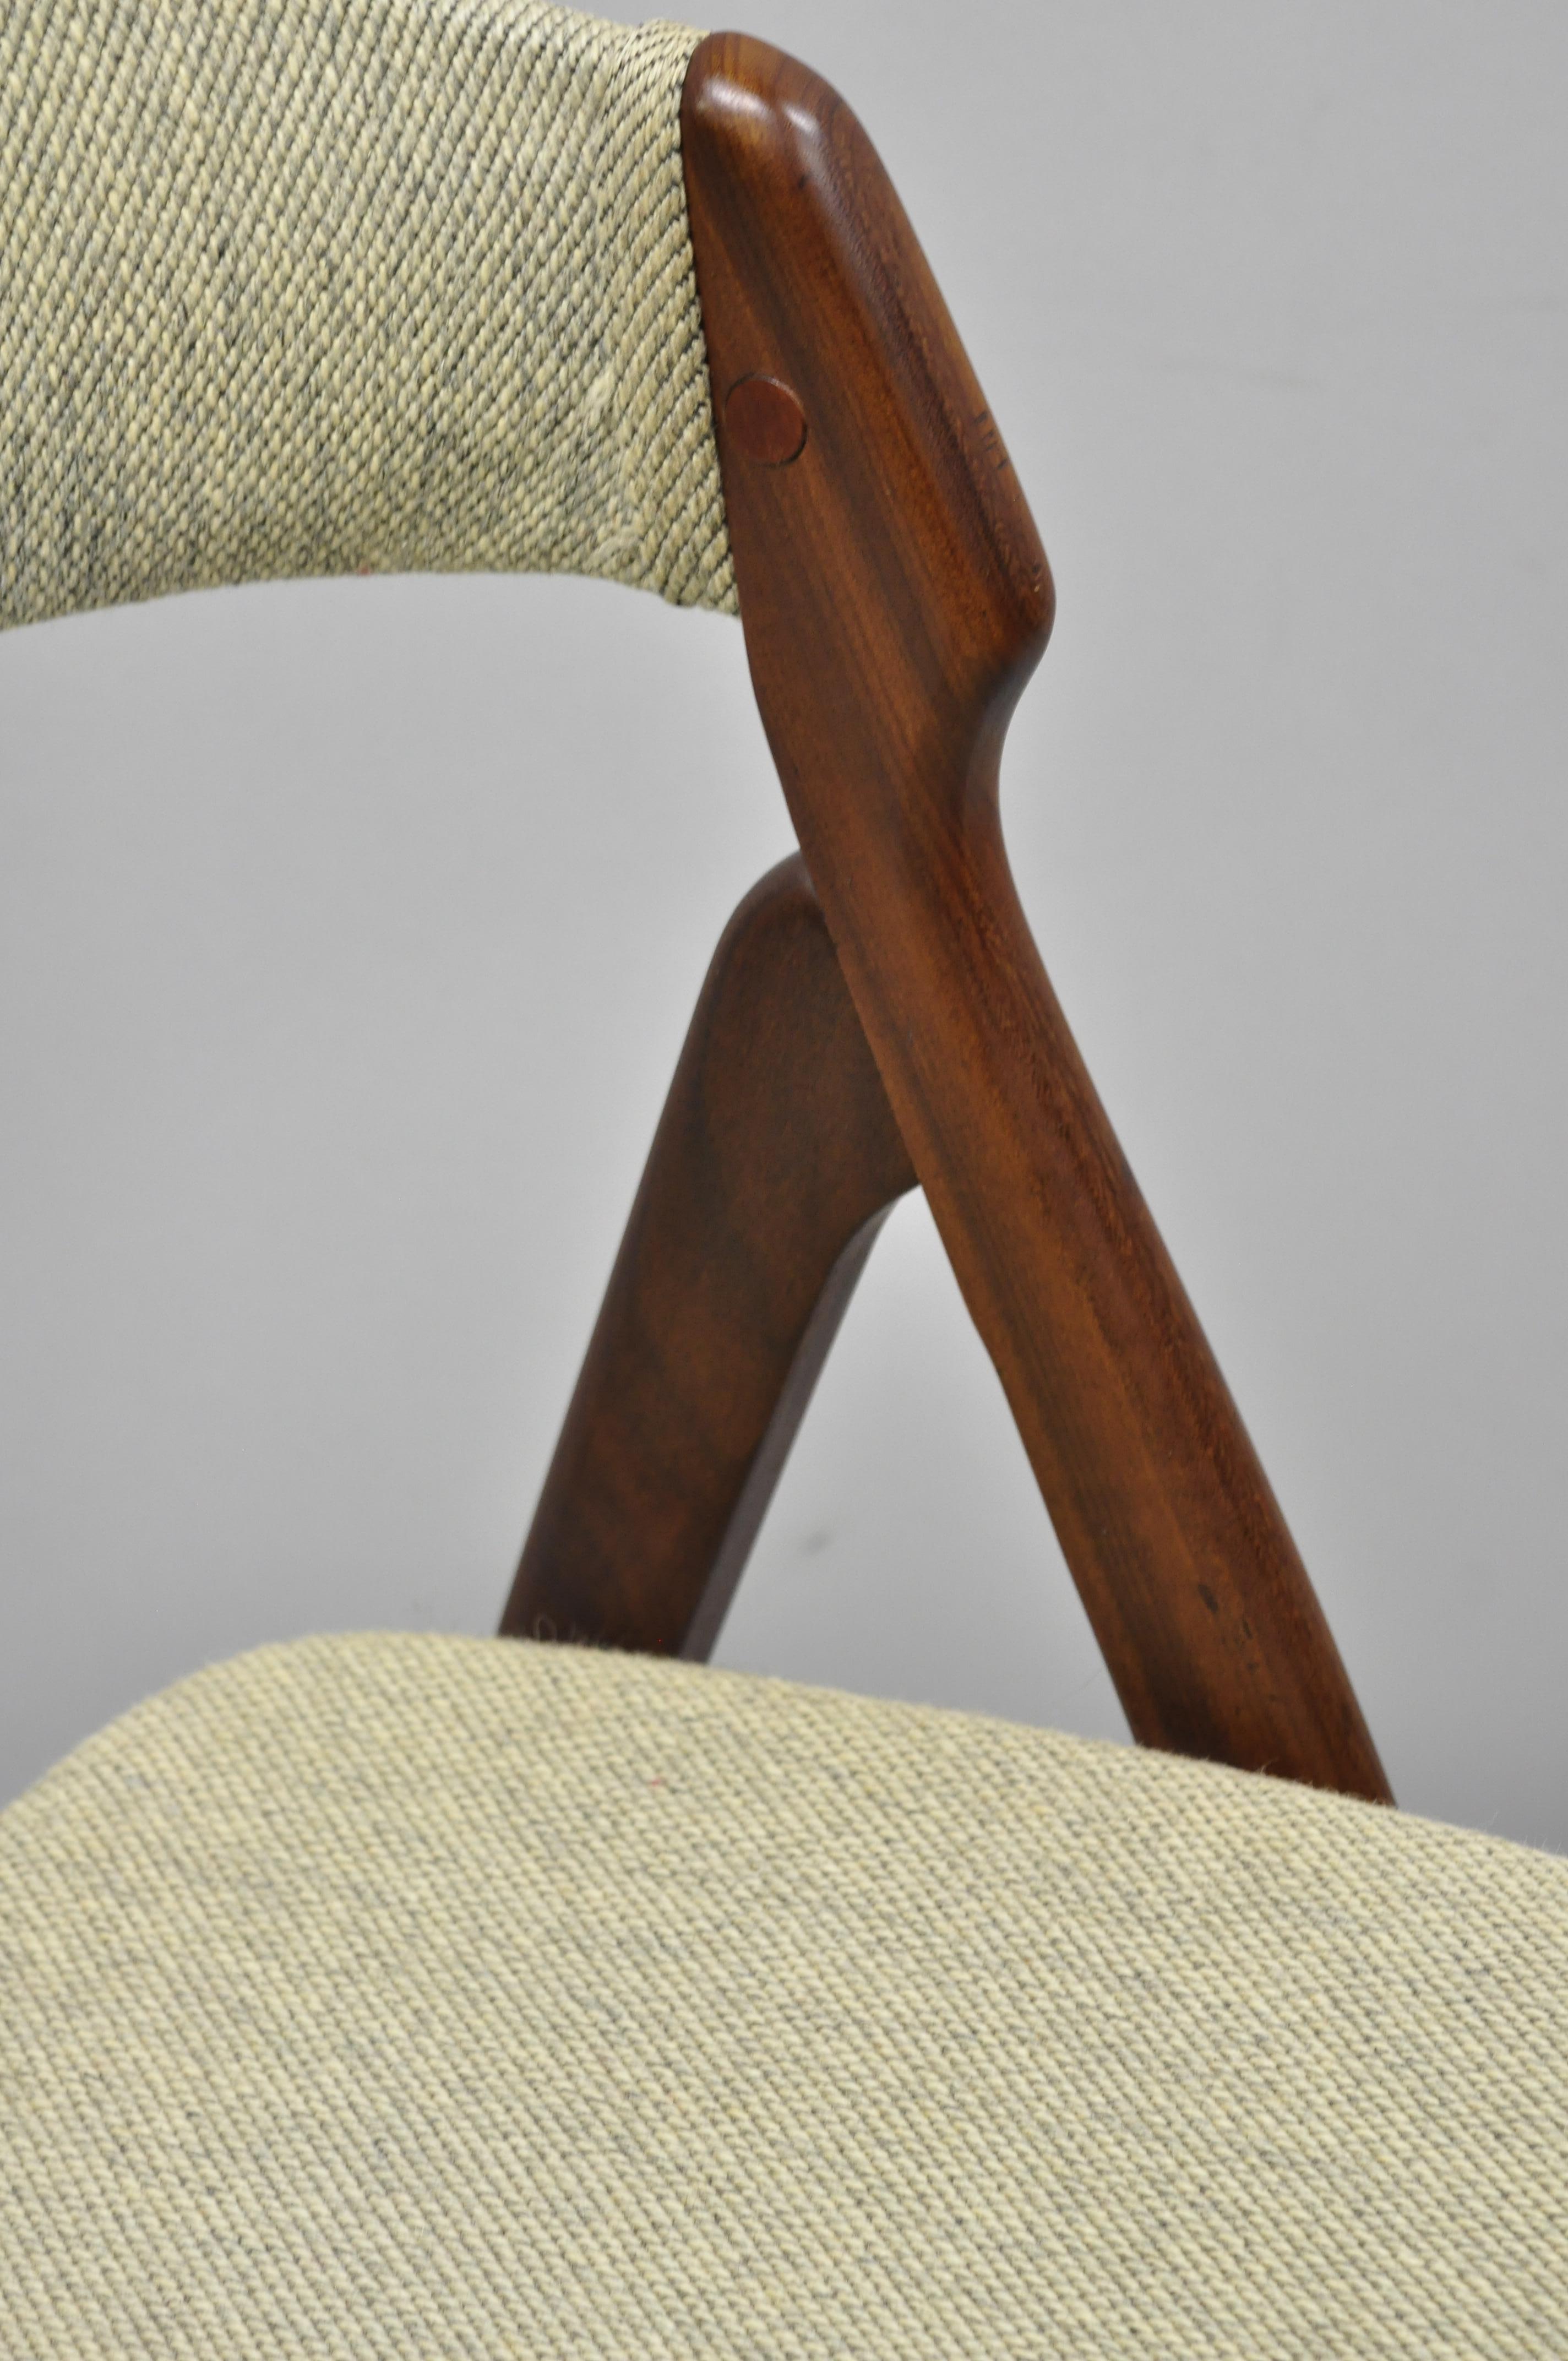 20th Century Midcentury Danish Modern Teak A-Frame Dining Chair by T.H. Harlev Farstrup For Sale